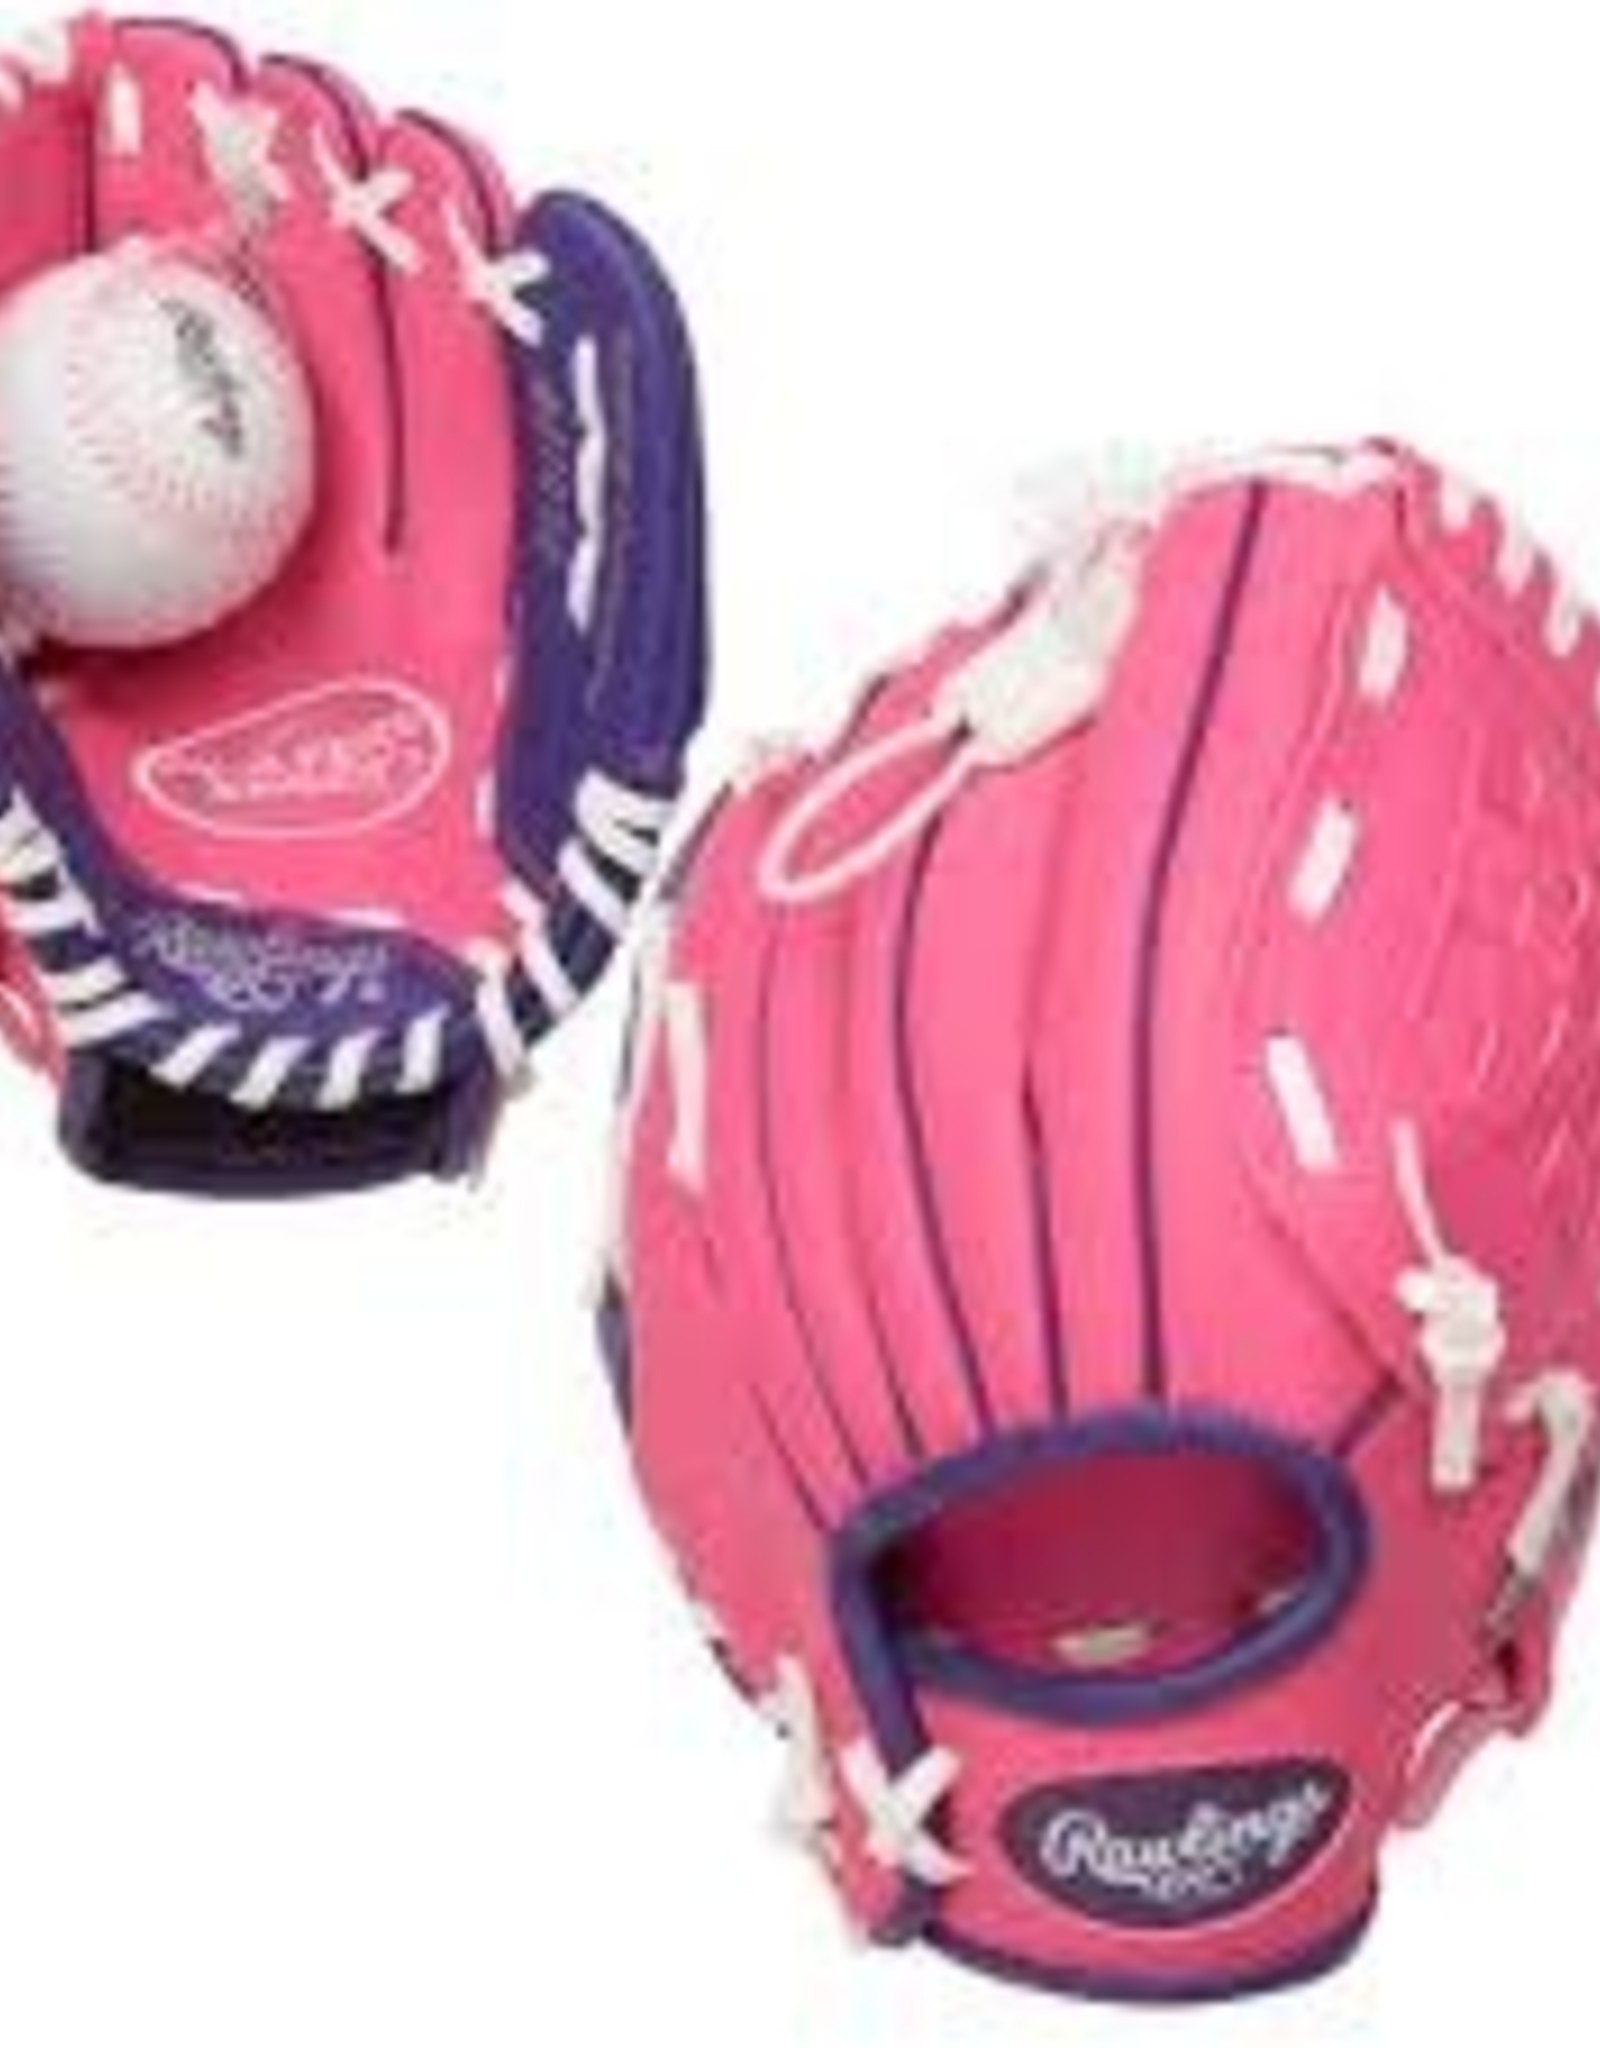 Rawlings Players 9 in Glove 9